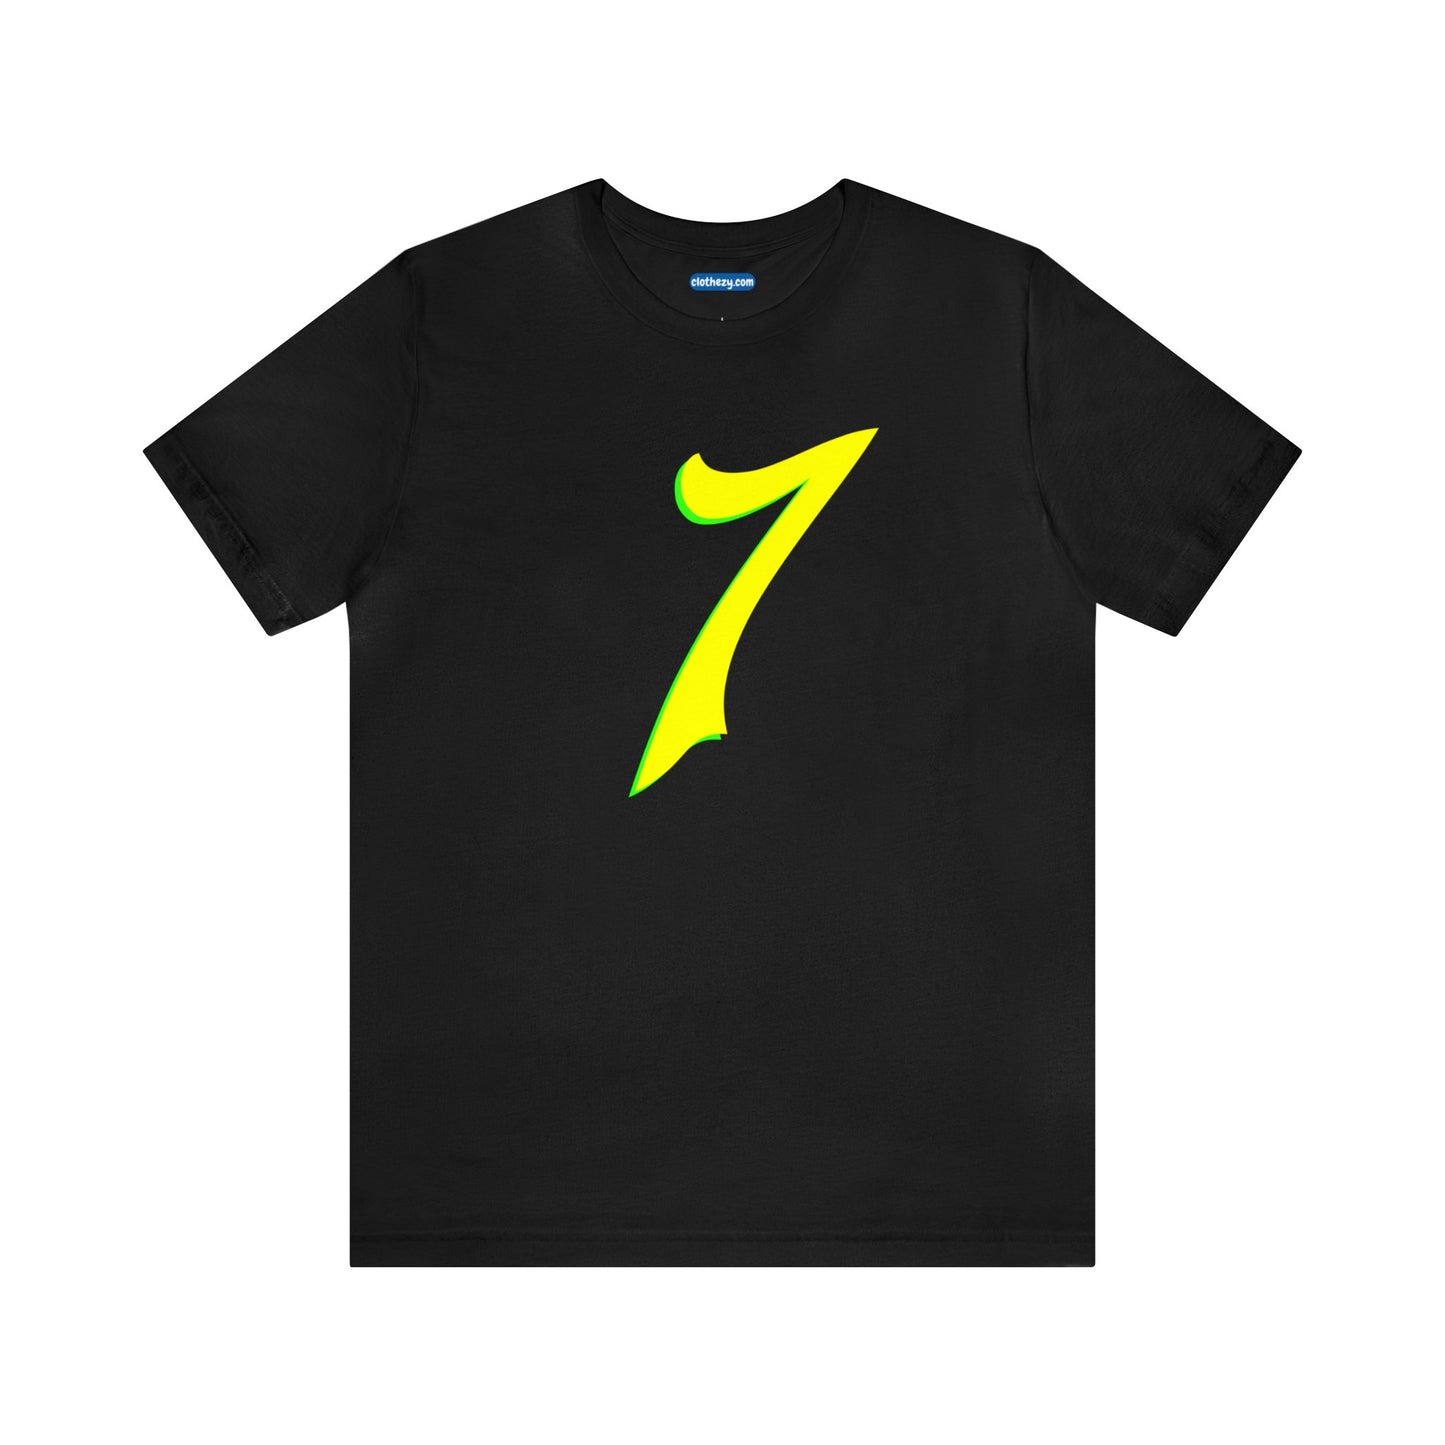 Number 7 Design - Soft Cotton Tee for birthdays and celebrations, Gift for friends and family, Multiple Options by clothezy.com in Dark Grey Heather Size Small - Buy Now